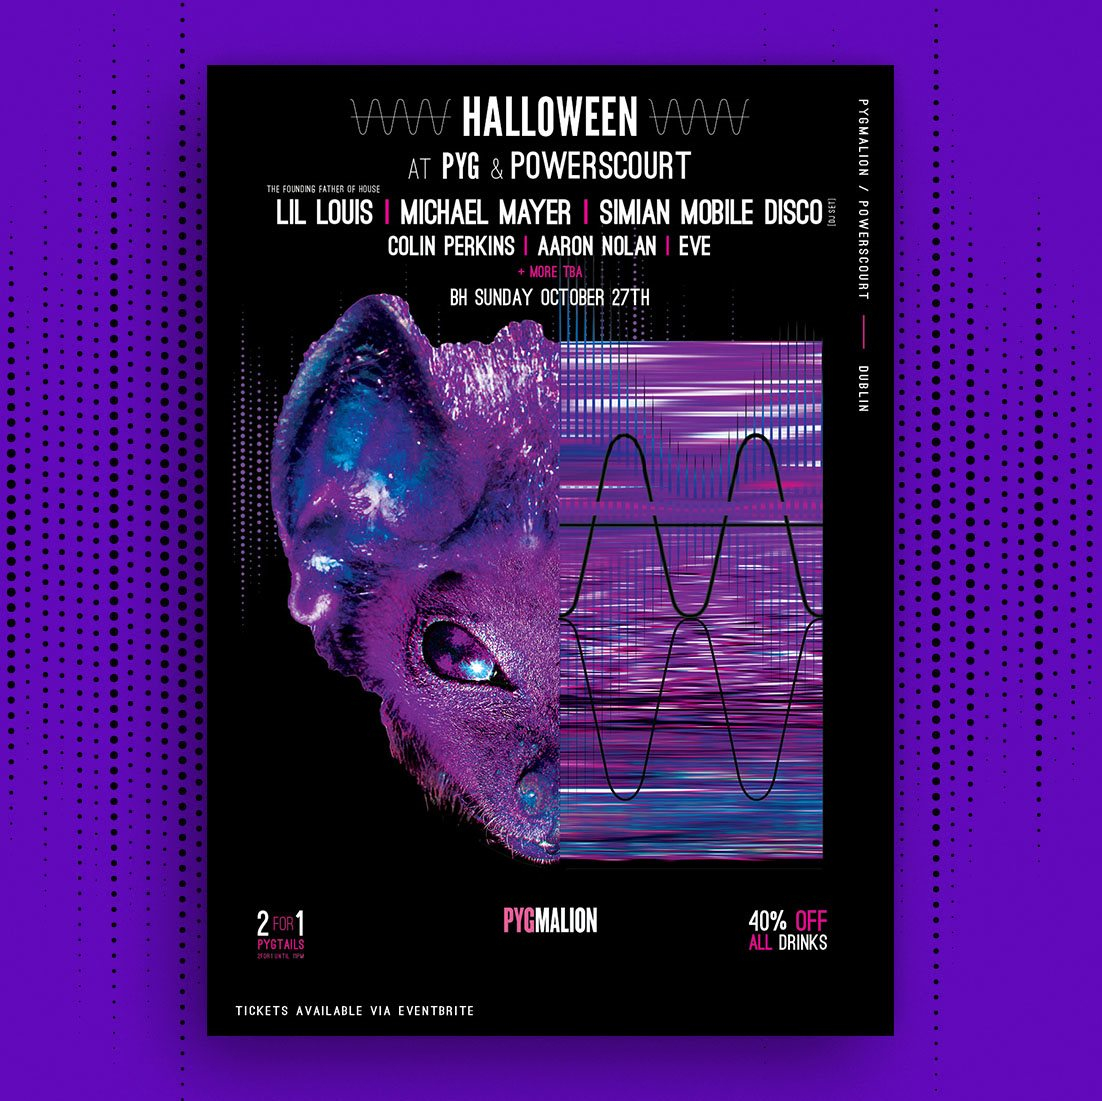 Halloween at Powerscourt with Lil Louis, Michael Mayer & Simian Mobile Disco - Flyer front